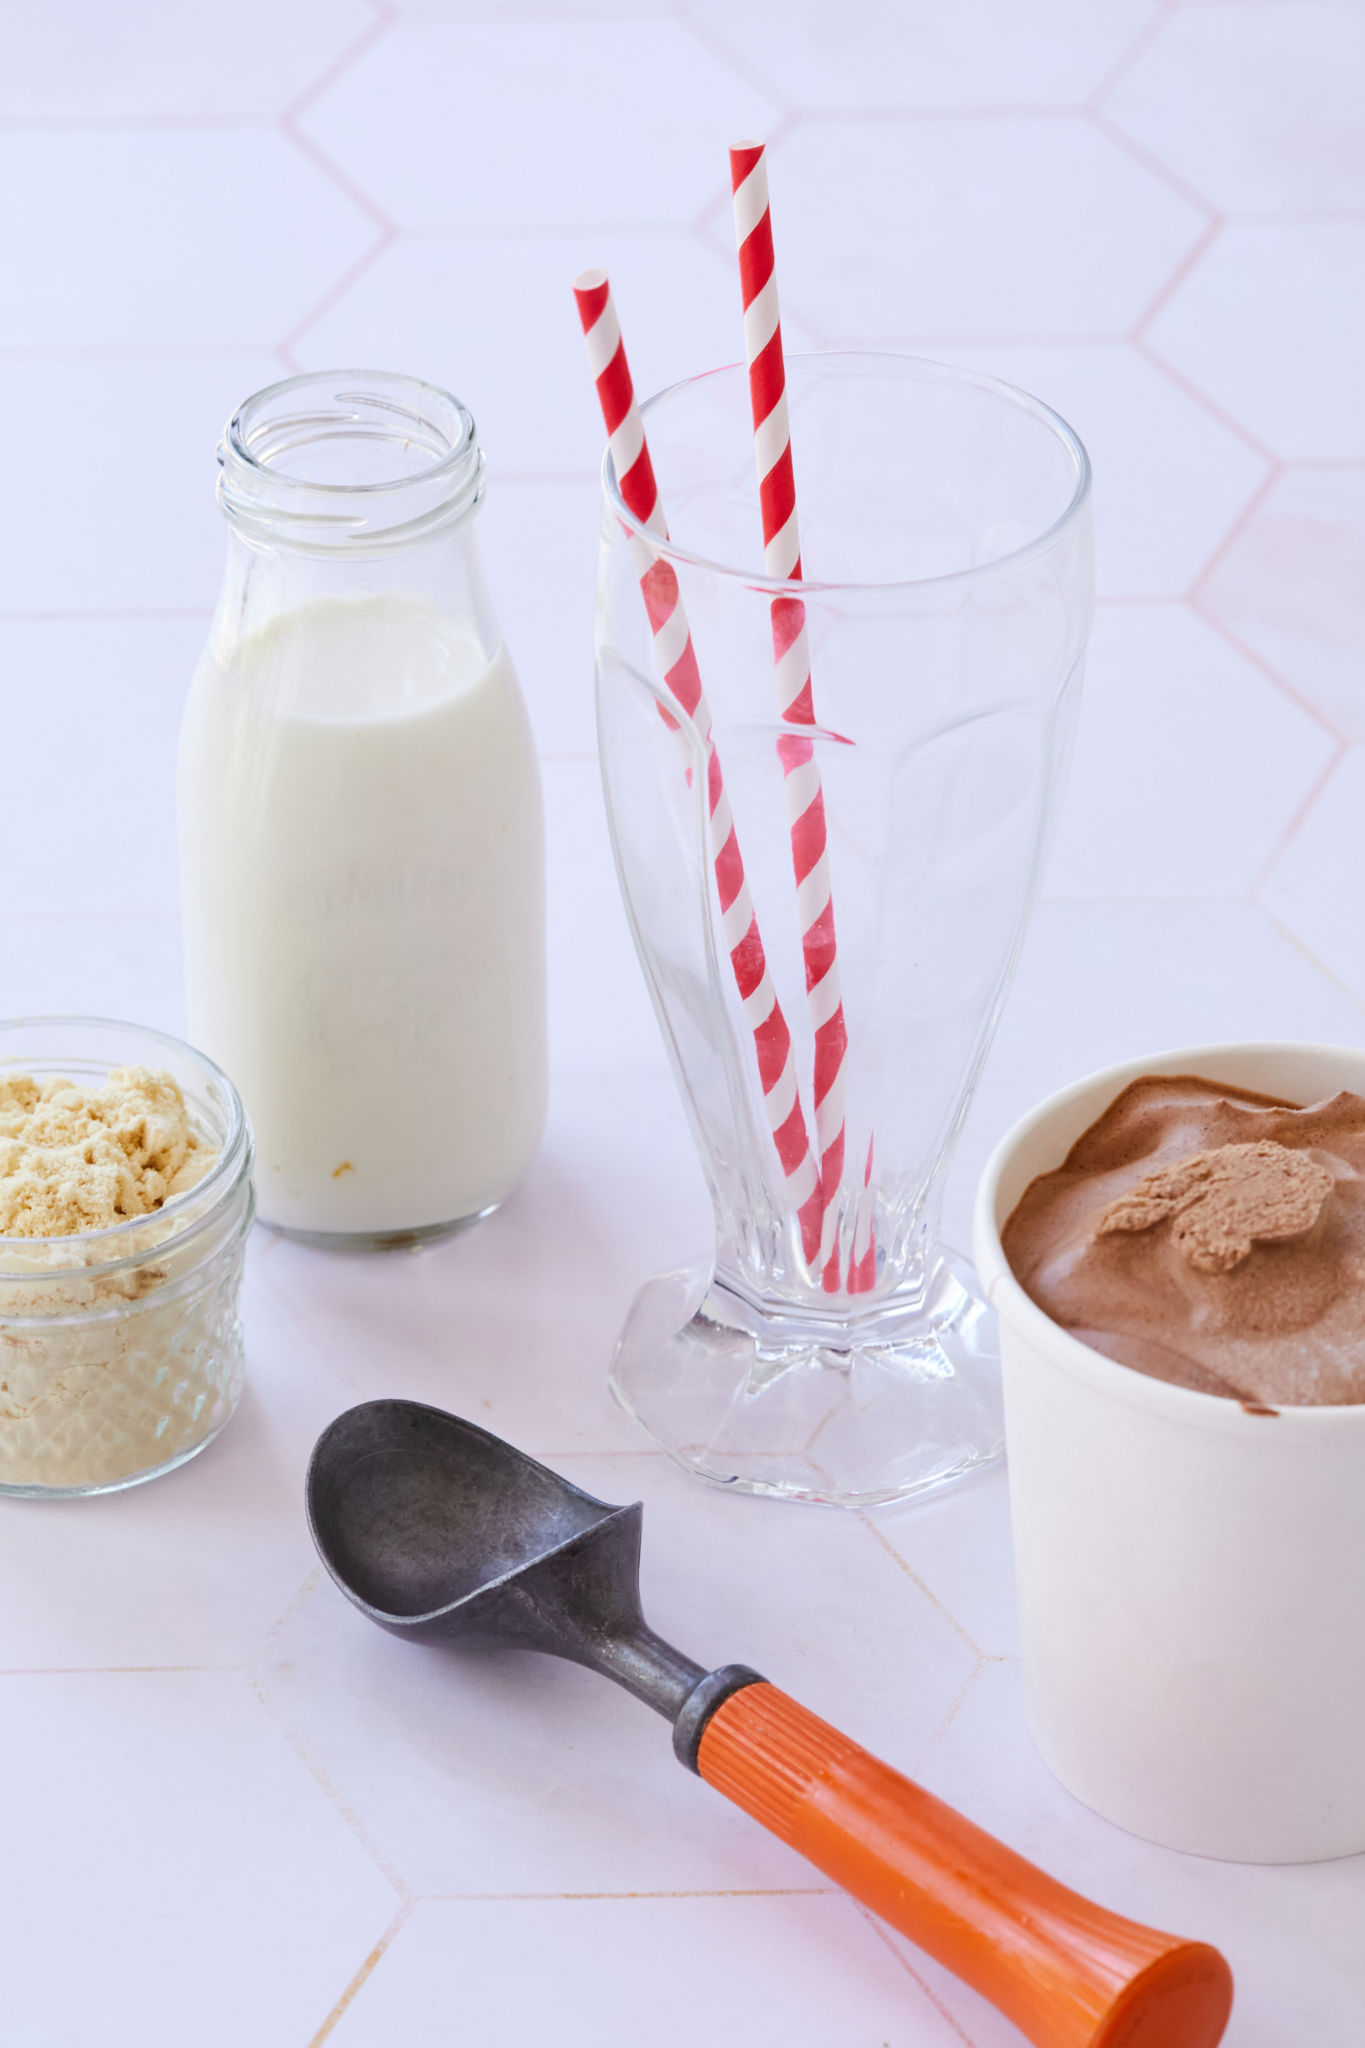 An empty soda fountain glass with two red and white straws sits next to a glass of milk, a jar of malt powder, and a tub of chocolate ice cream.